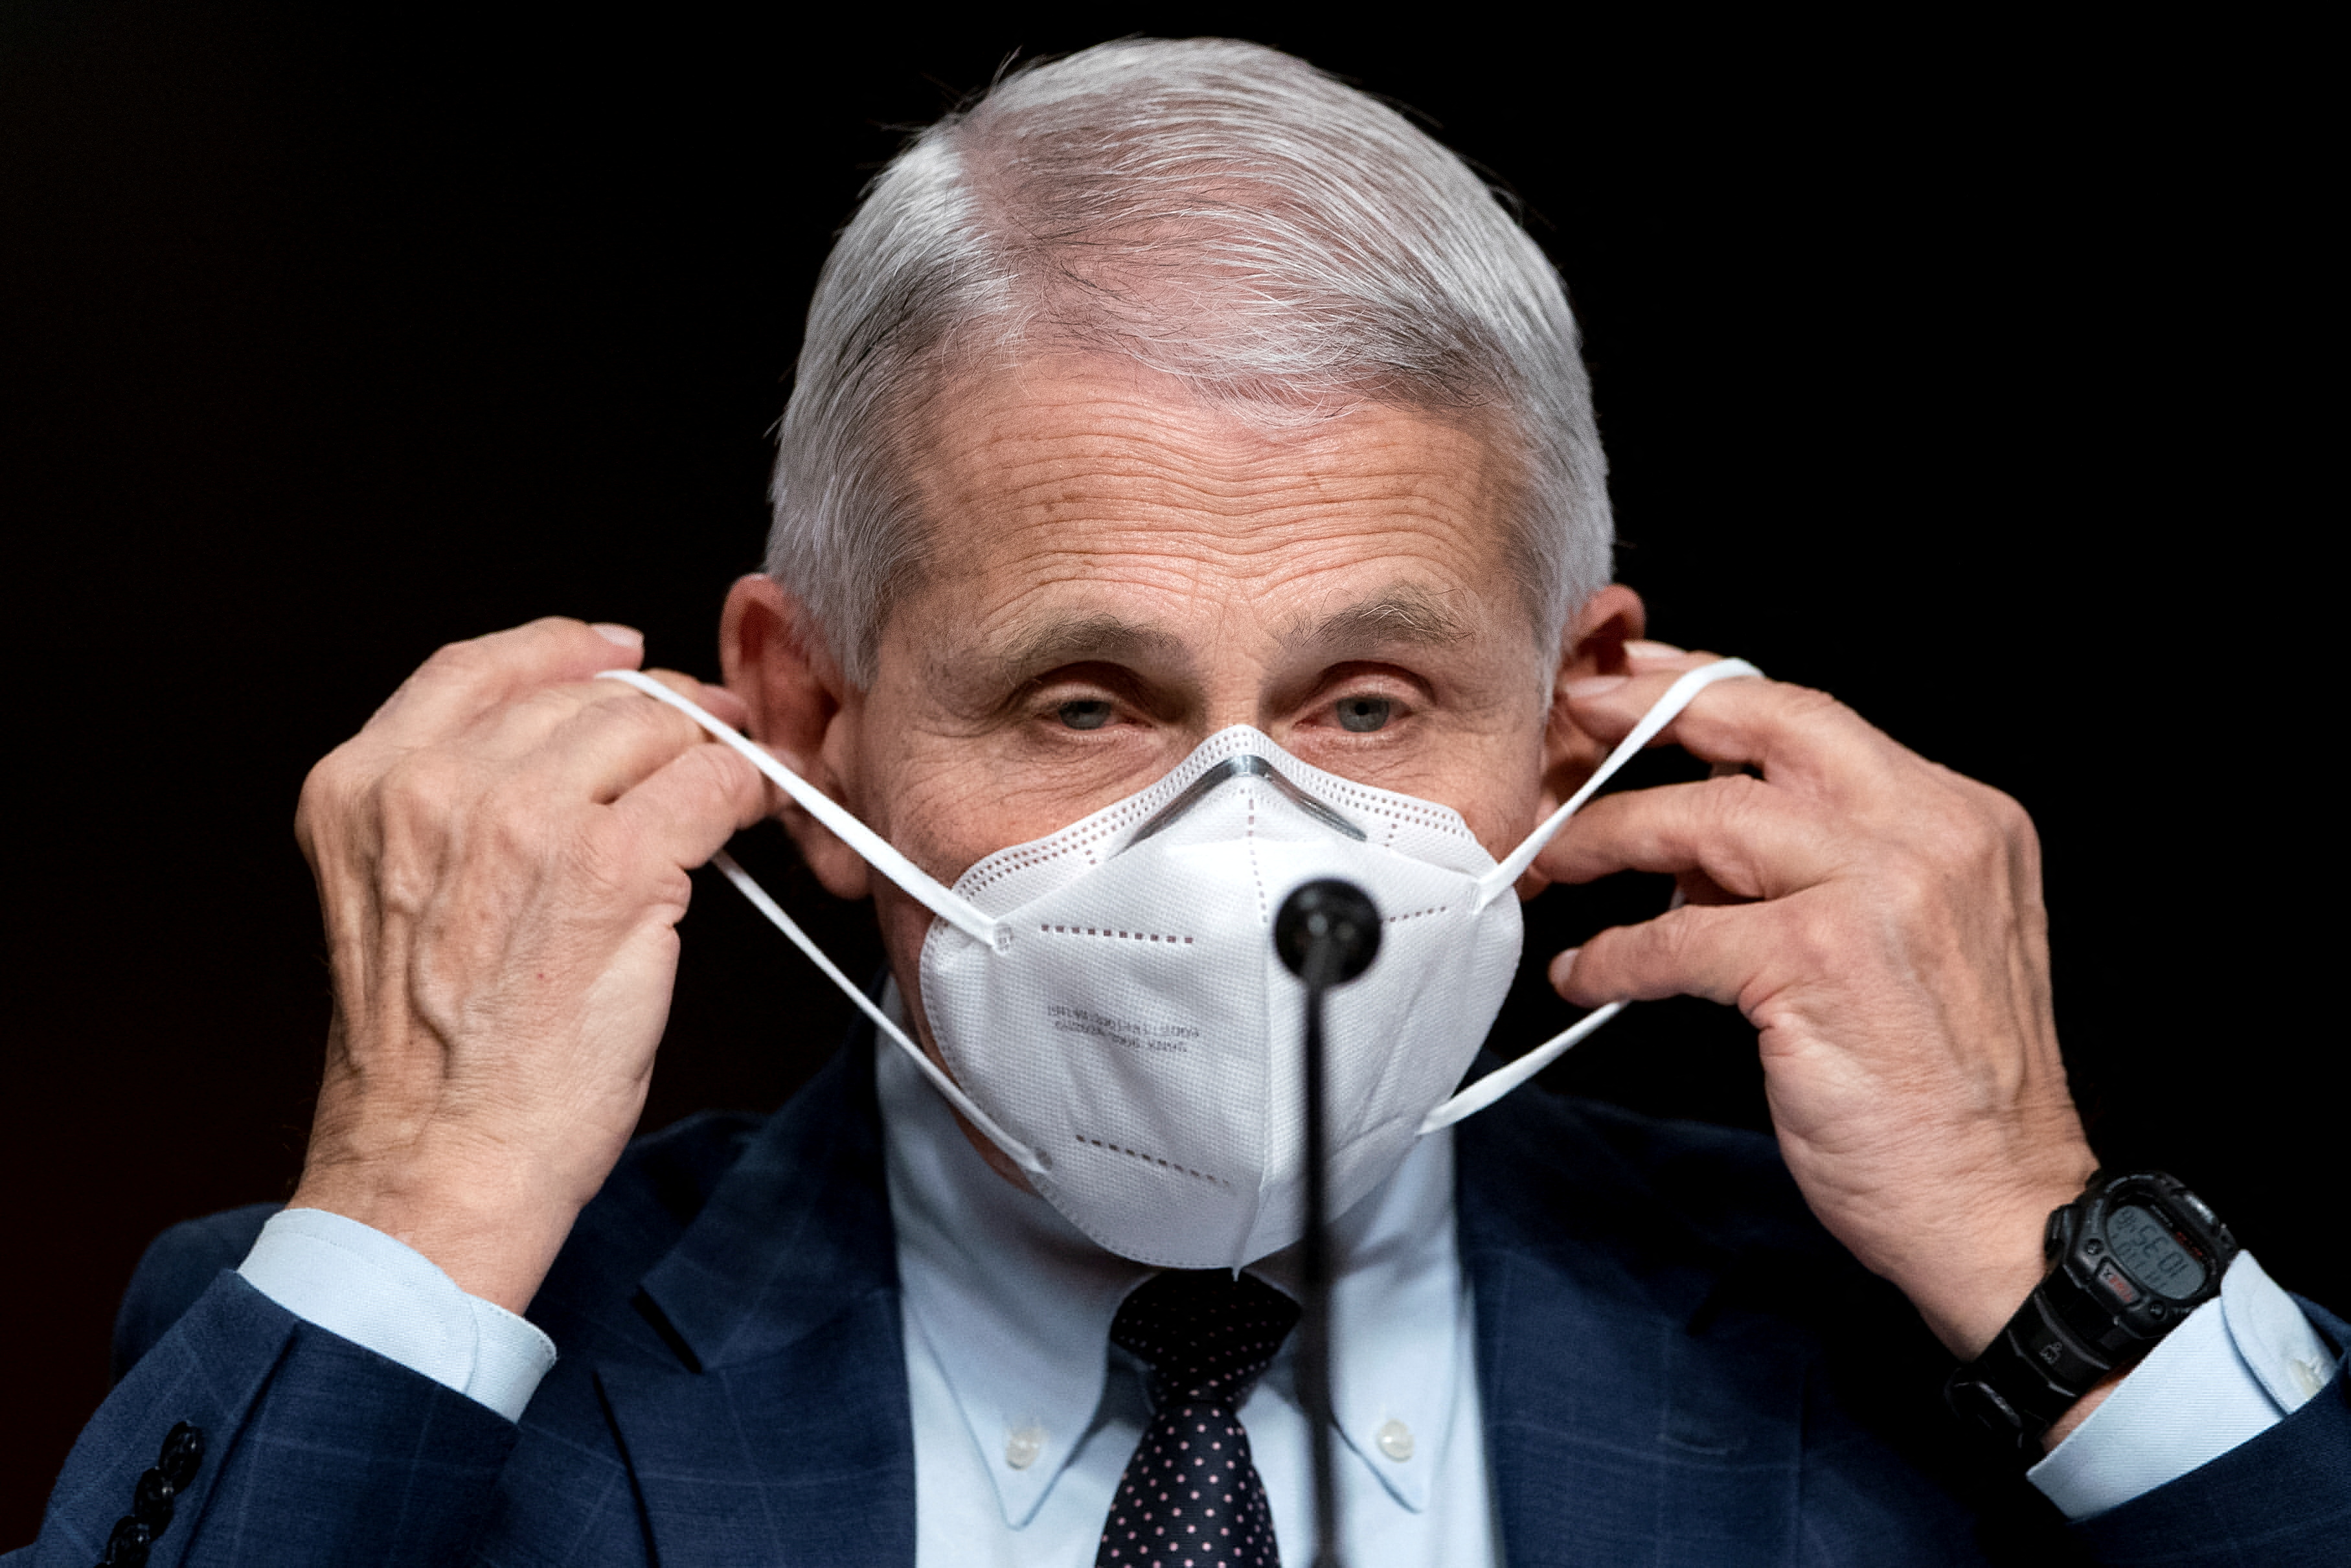 FILE PHOTO: Dr. Anthony Fauci, director of the National Institute of Allergy and Infectious Diseases, removes his face mask to give an opening statement during a Senate Health, Education, Labor, and Pensions Committee hearing to examine the federal response to the coronavirus disease (COVID-19) and new emerging variants at Capitol Hill in Washington, D.C., U.S.  January 11, 2022. Greg Nash/Pool via REUTERS/File Photo